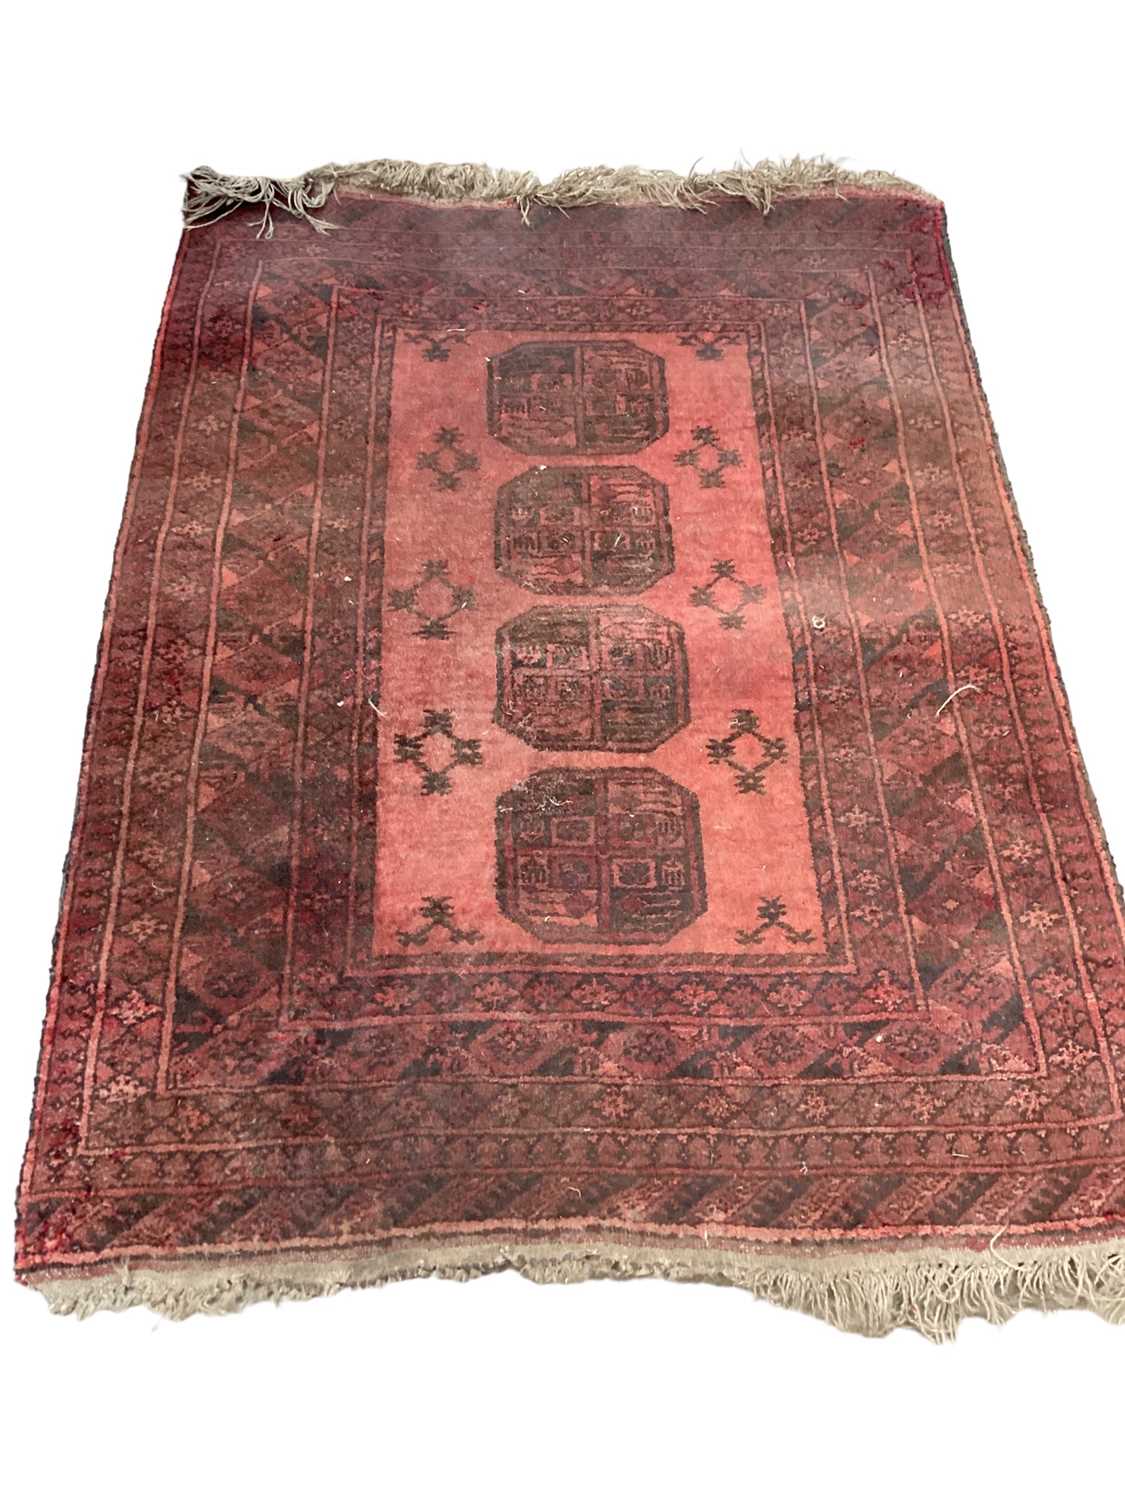 Eastern rug with four central medallions on red ground, 135cm x 102cm